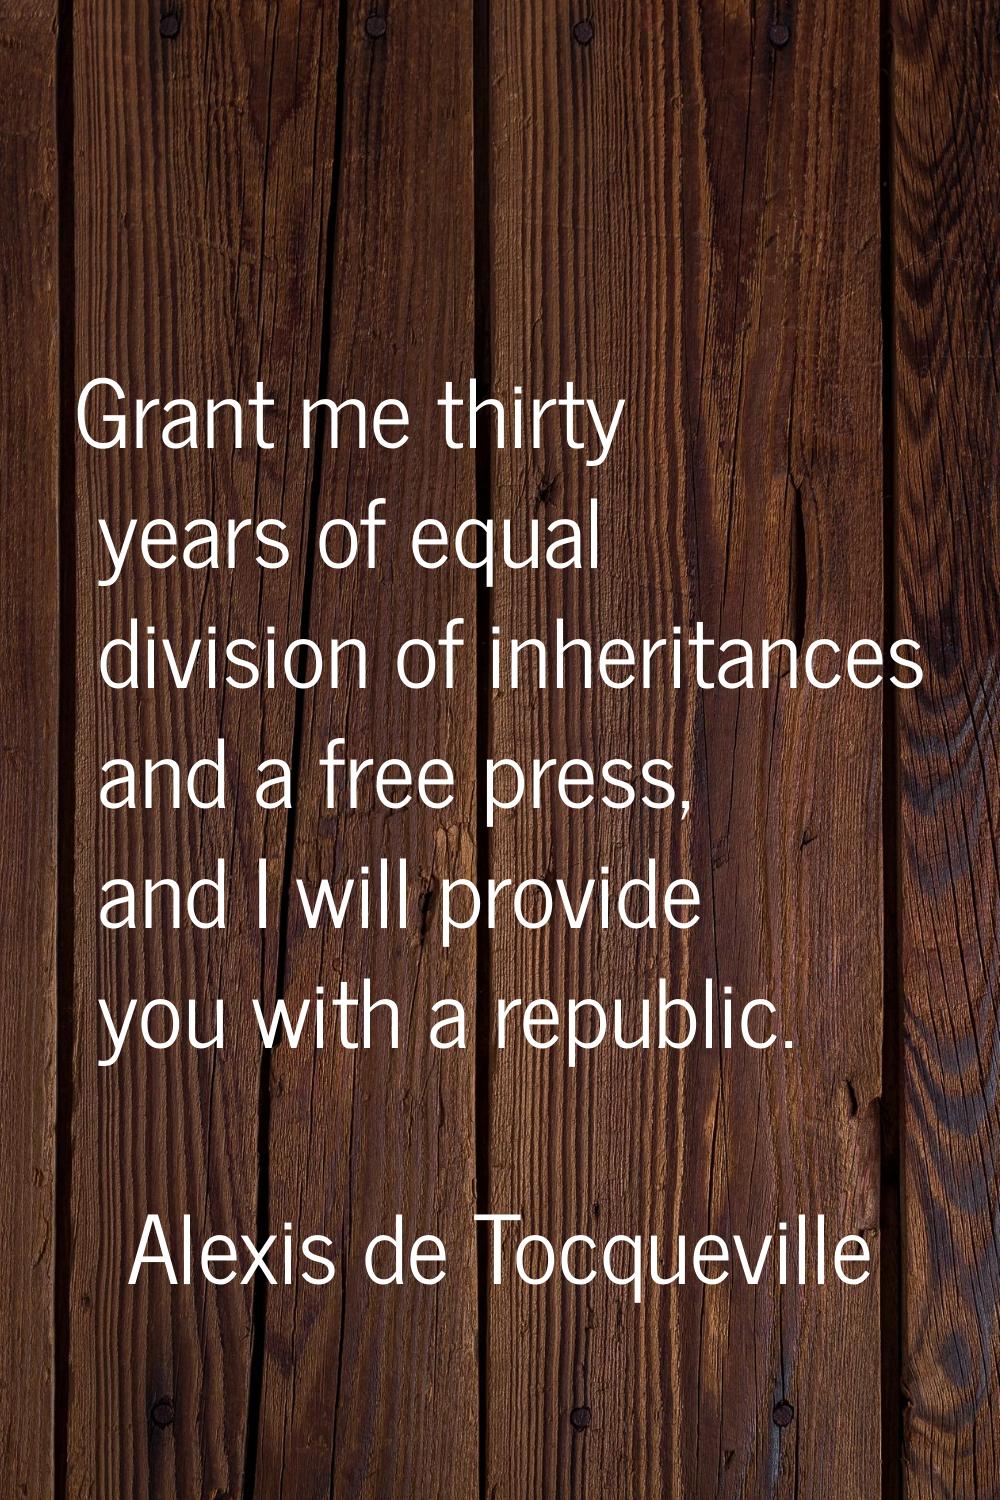 Grant me thirty years of equal division of inheritances and a free press, and I will provide you wi